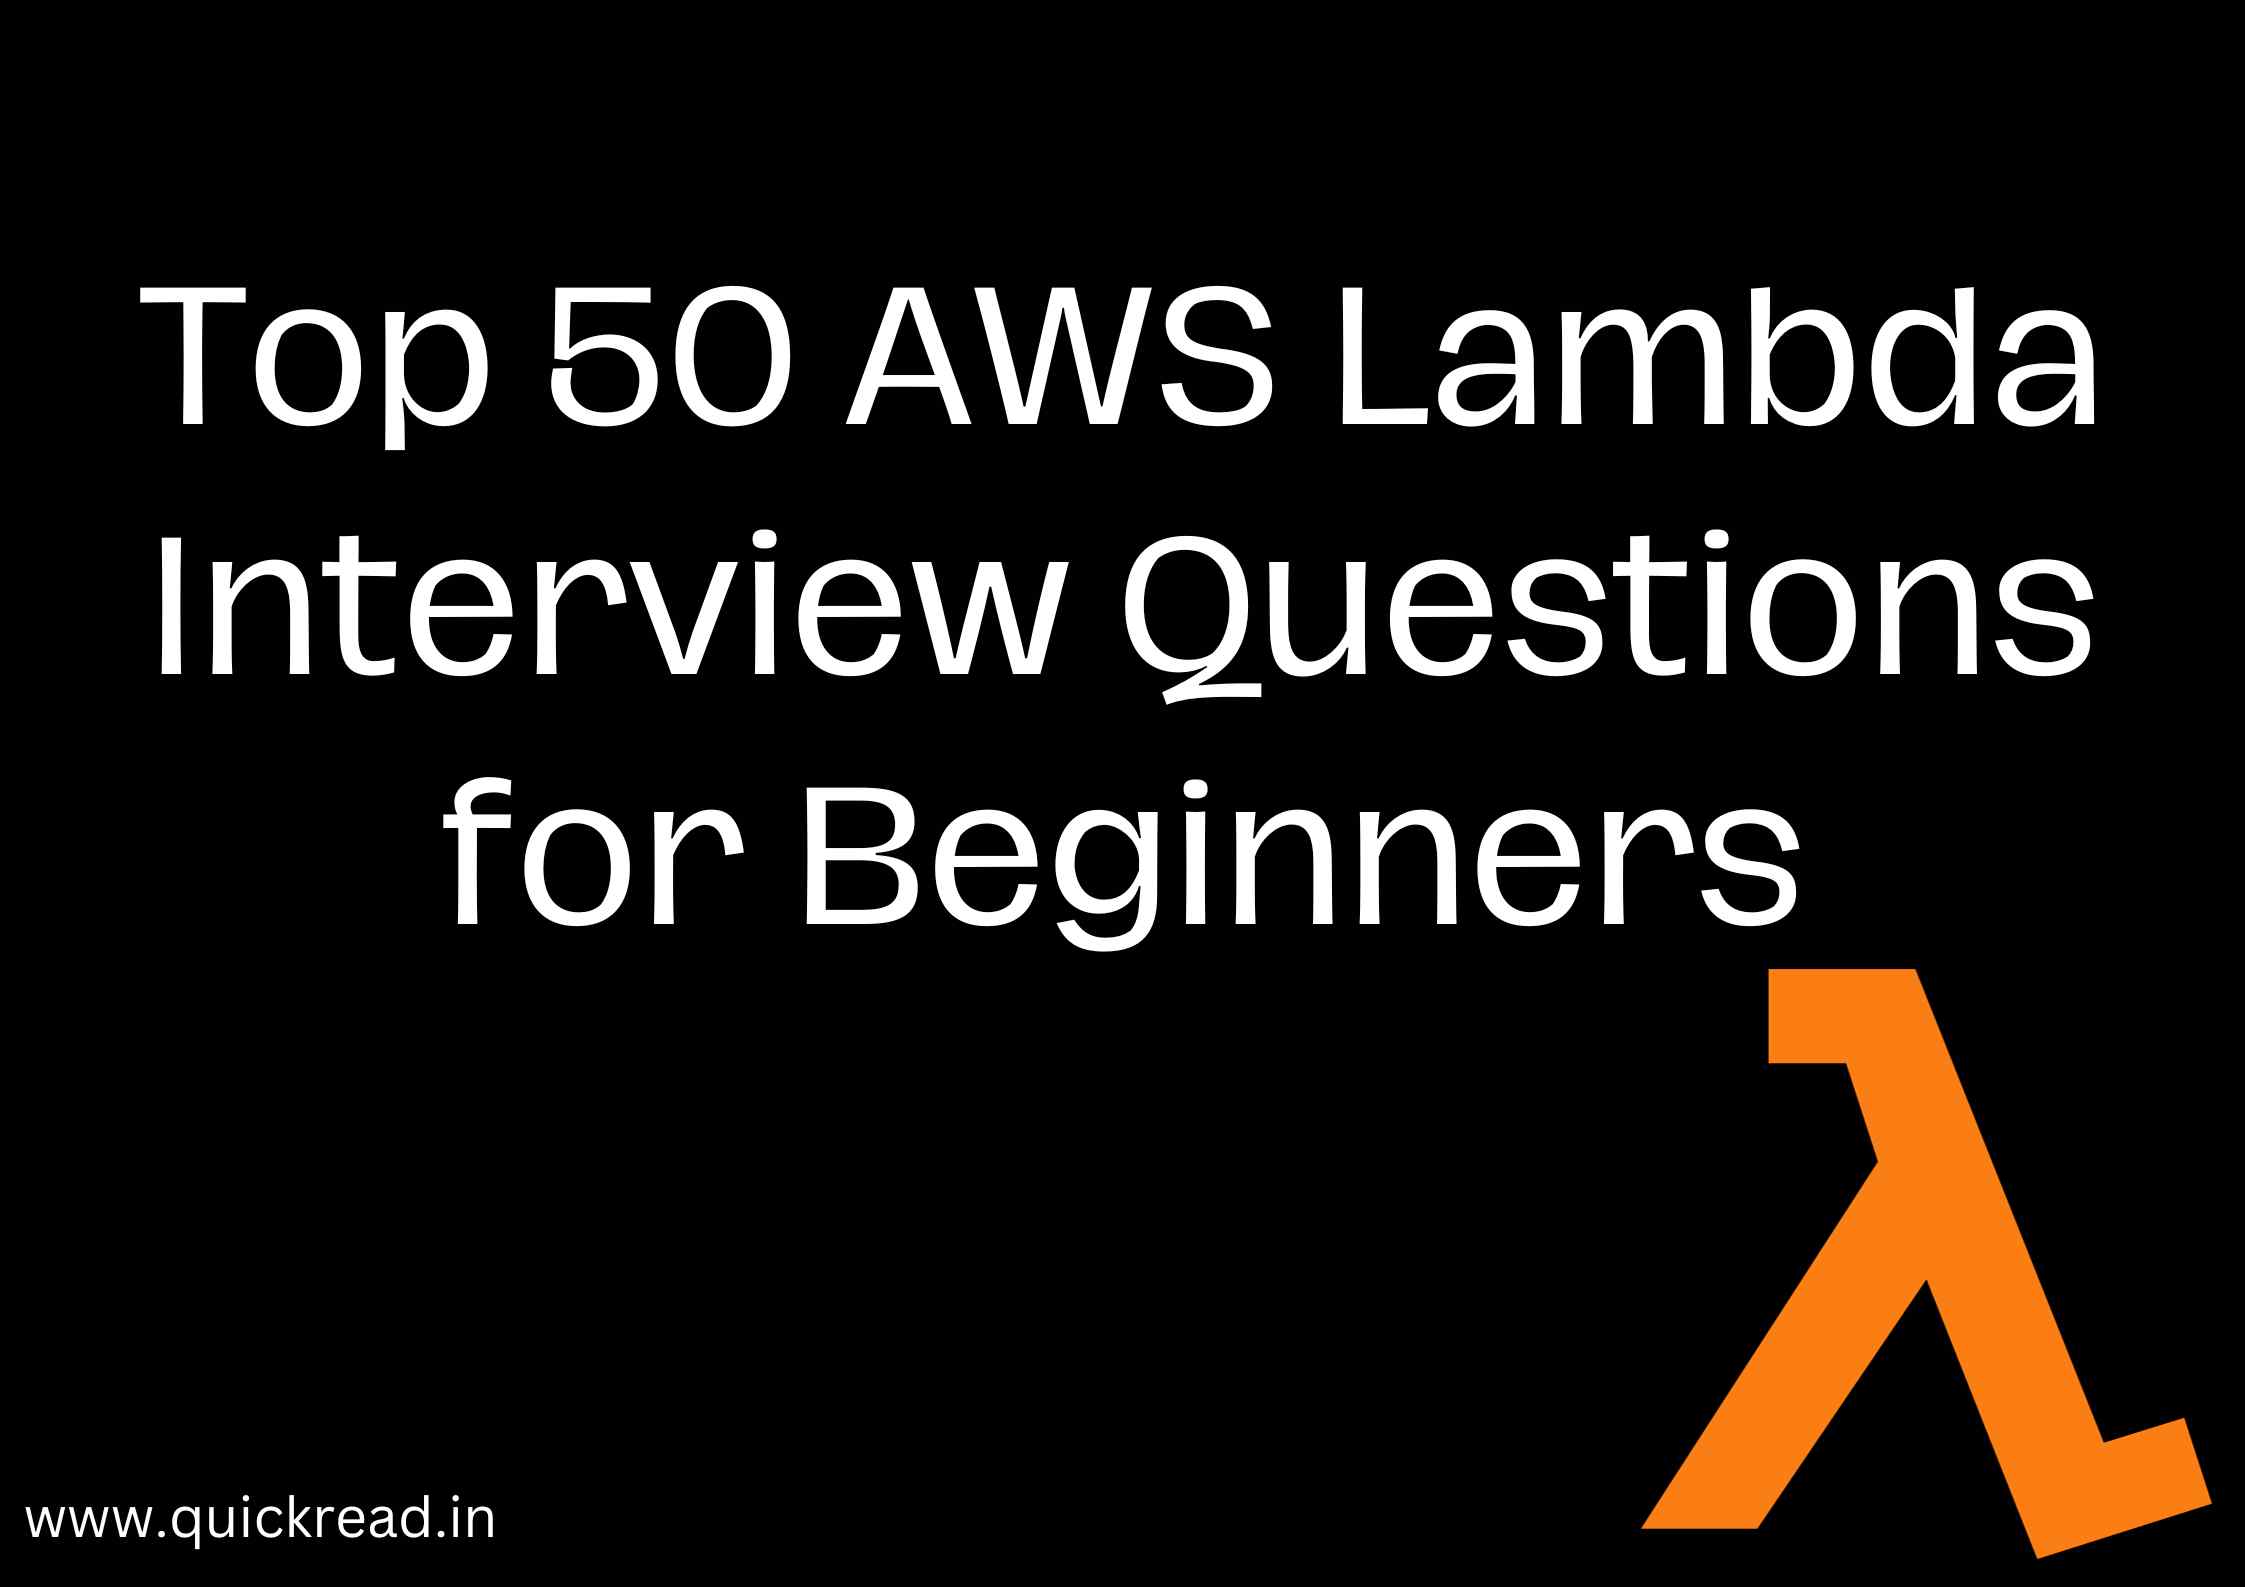 Top 50 AWS Lambda Interview Questions for Beginners